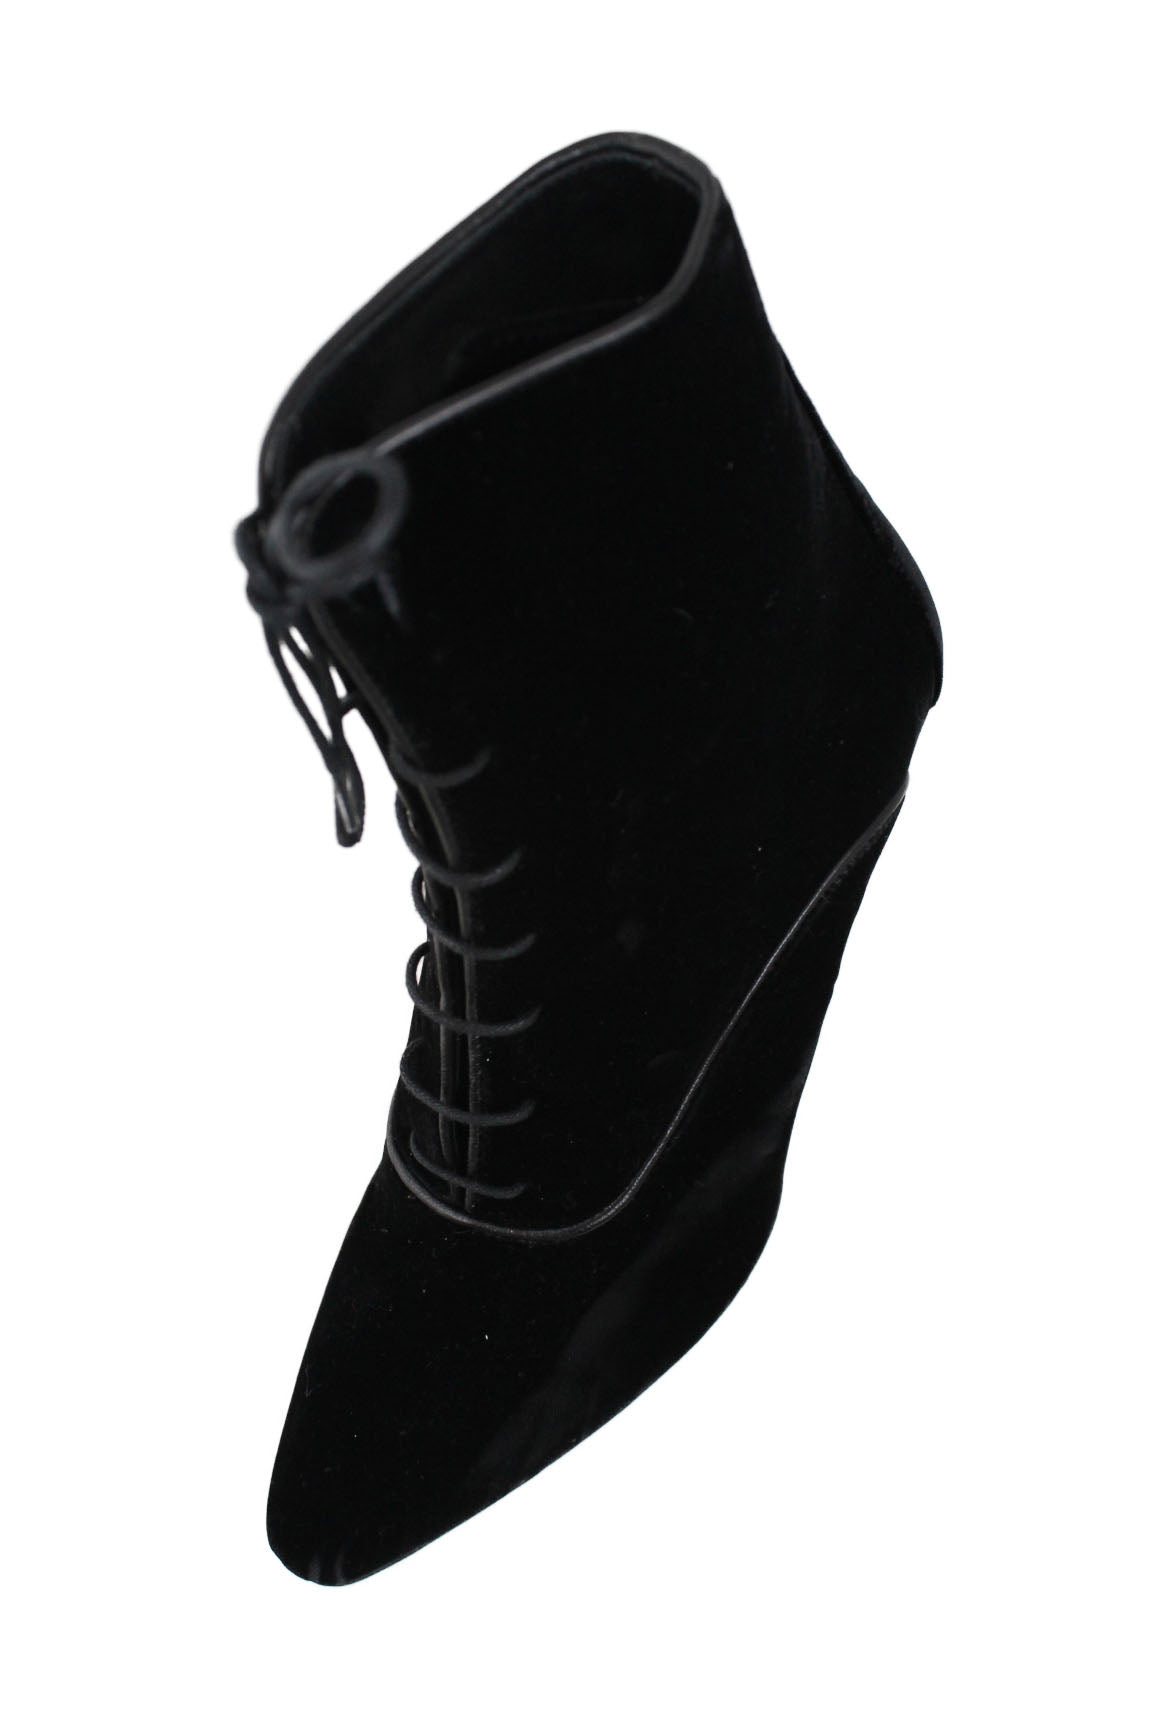 above angle of boots with lace up closure. 